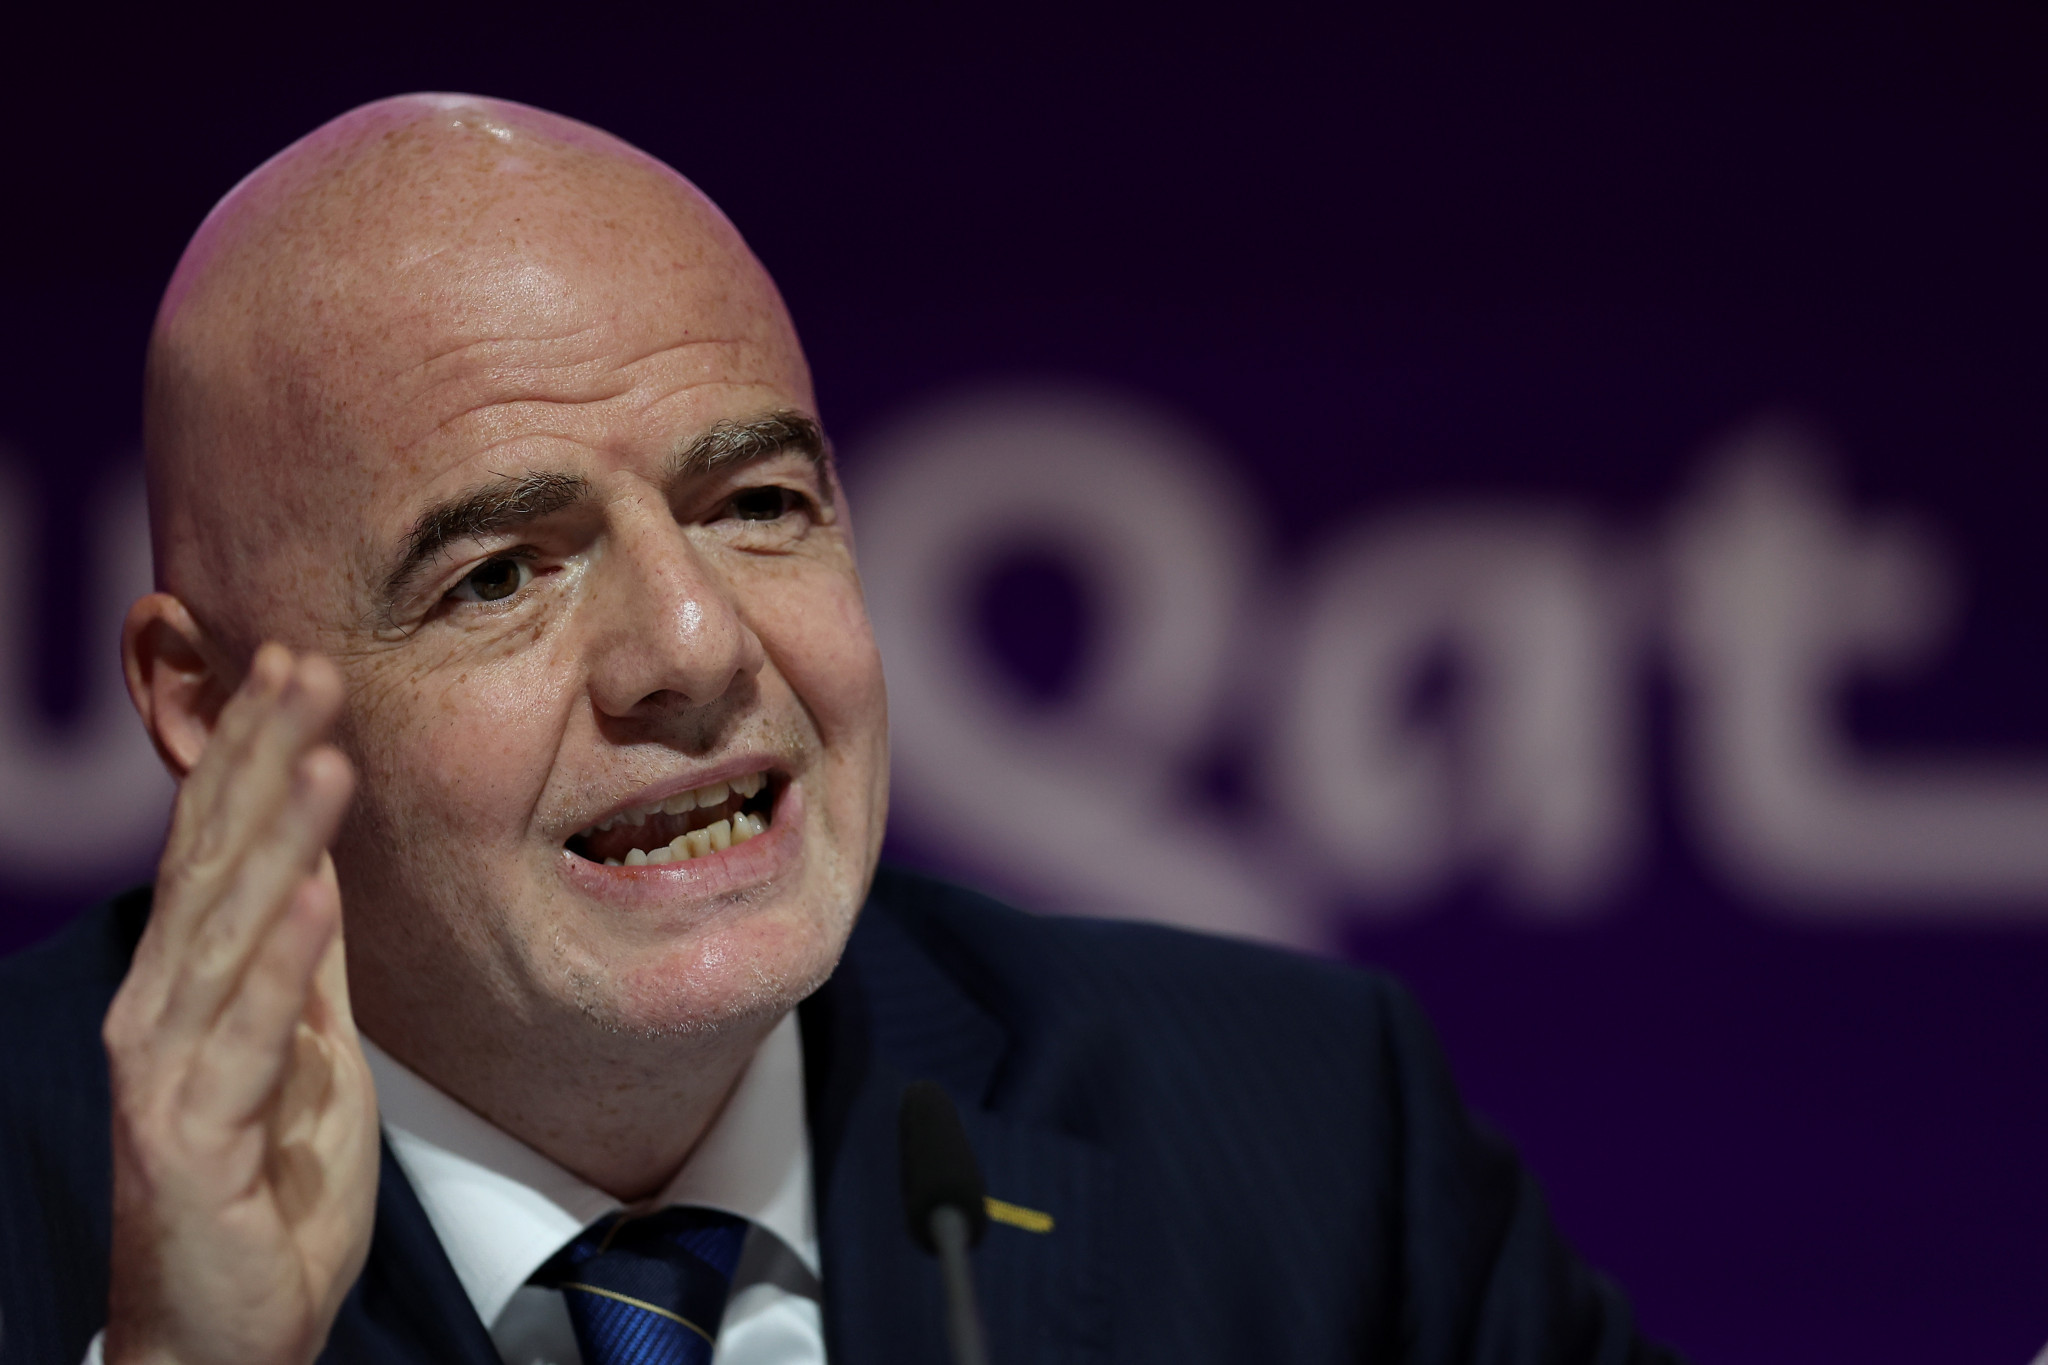 Gianni Infantino has accused Europe of hypocrisy at a press conference in Doha ©Getty Images